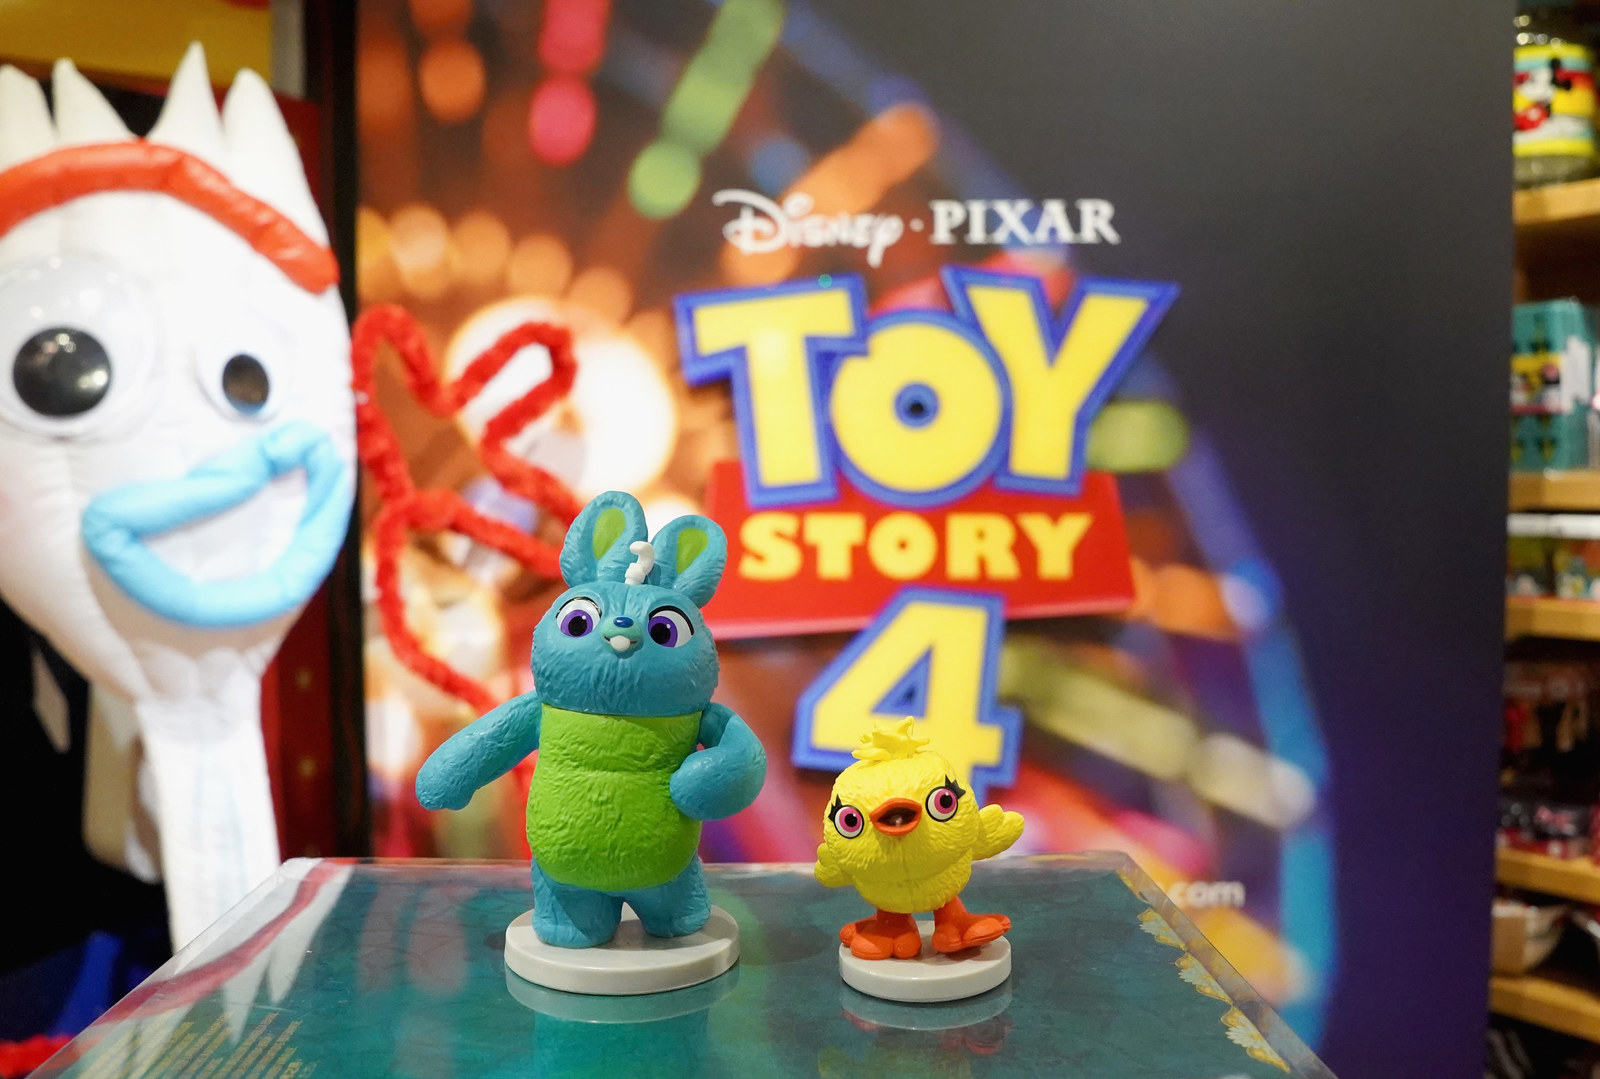 Pixar's Toy Story 4 is an unexpected 'marvel' - Atlanta Business Chronicle